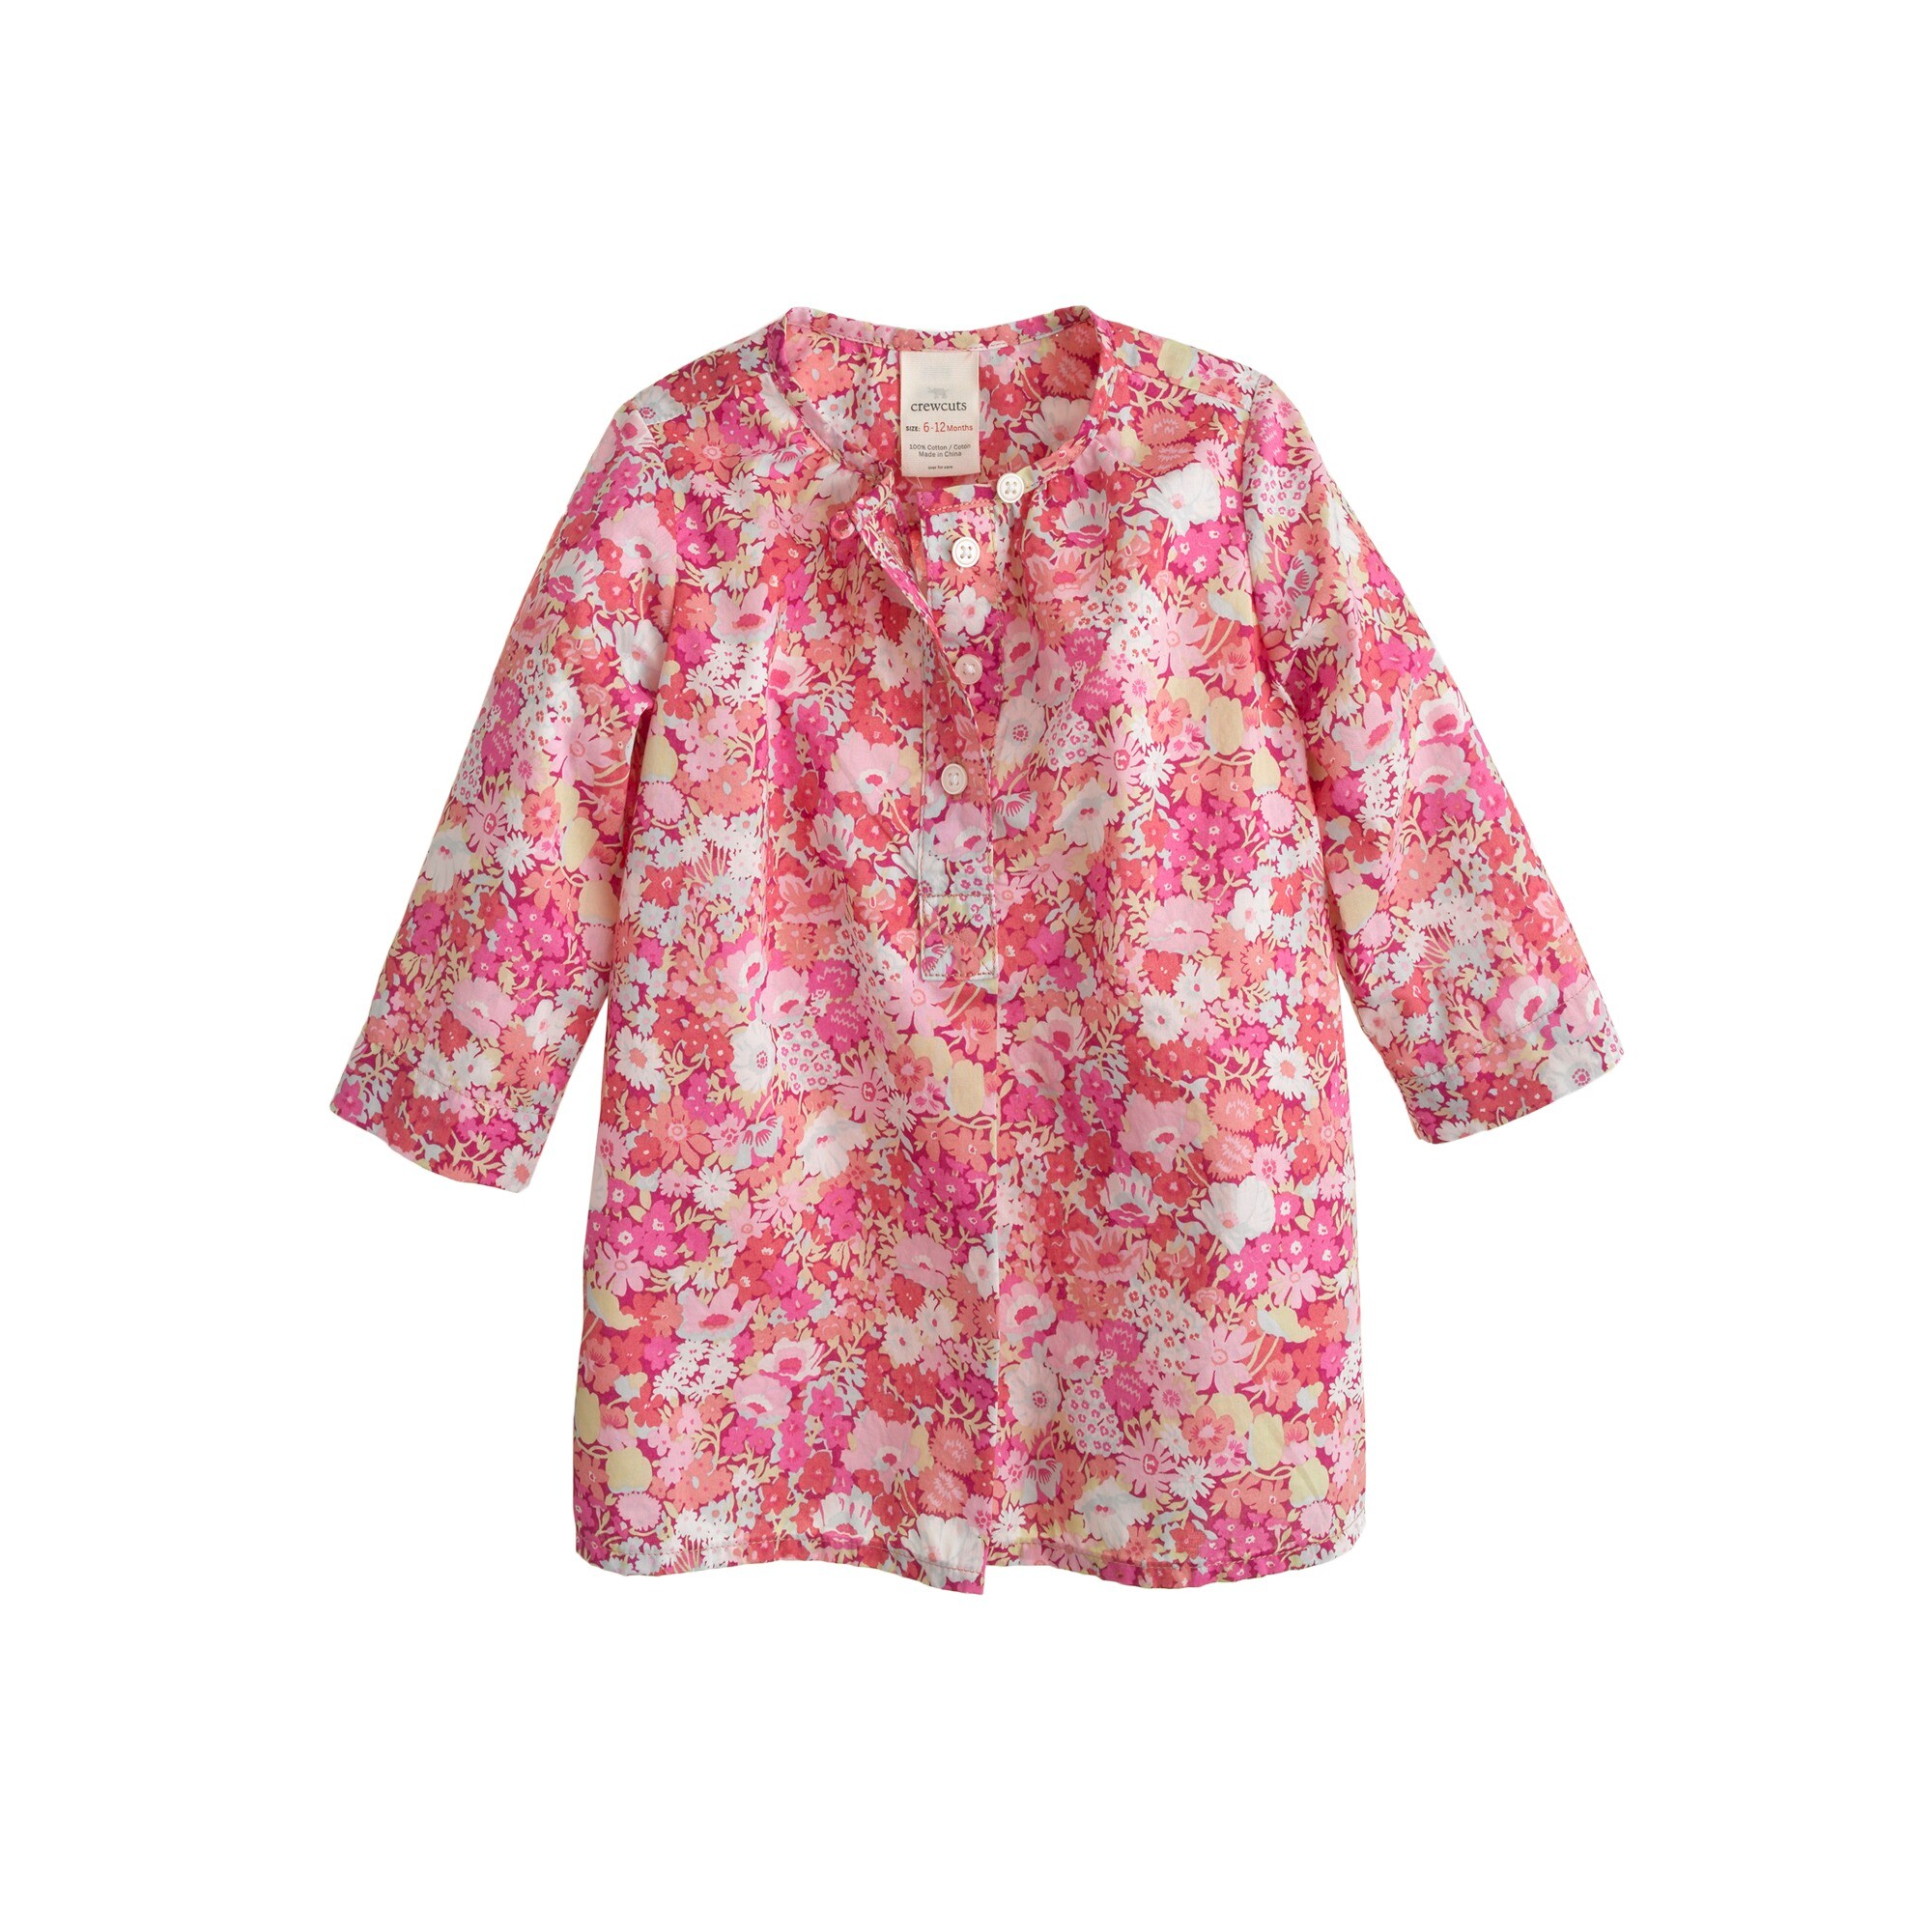 Baby Liberty tunic in Thorpe floral : shirts & tops | J.Crew